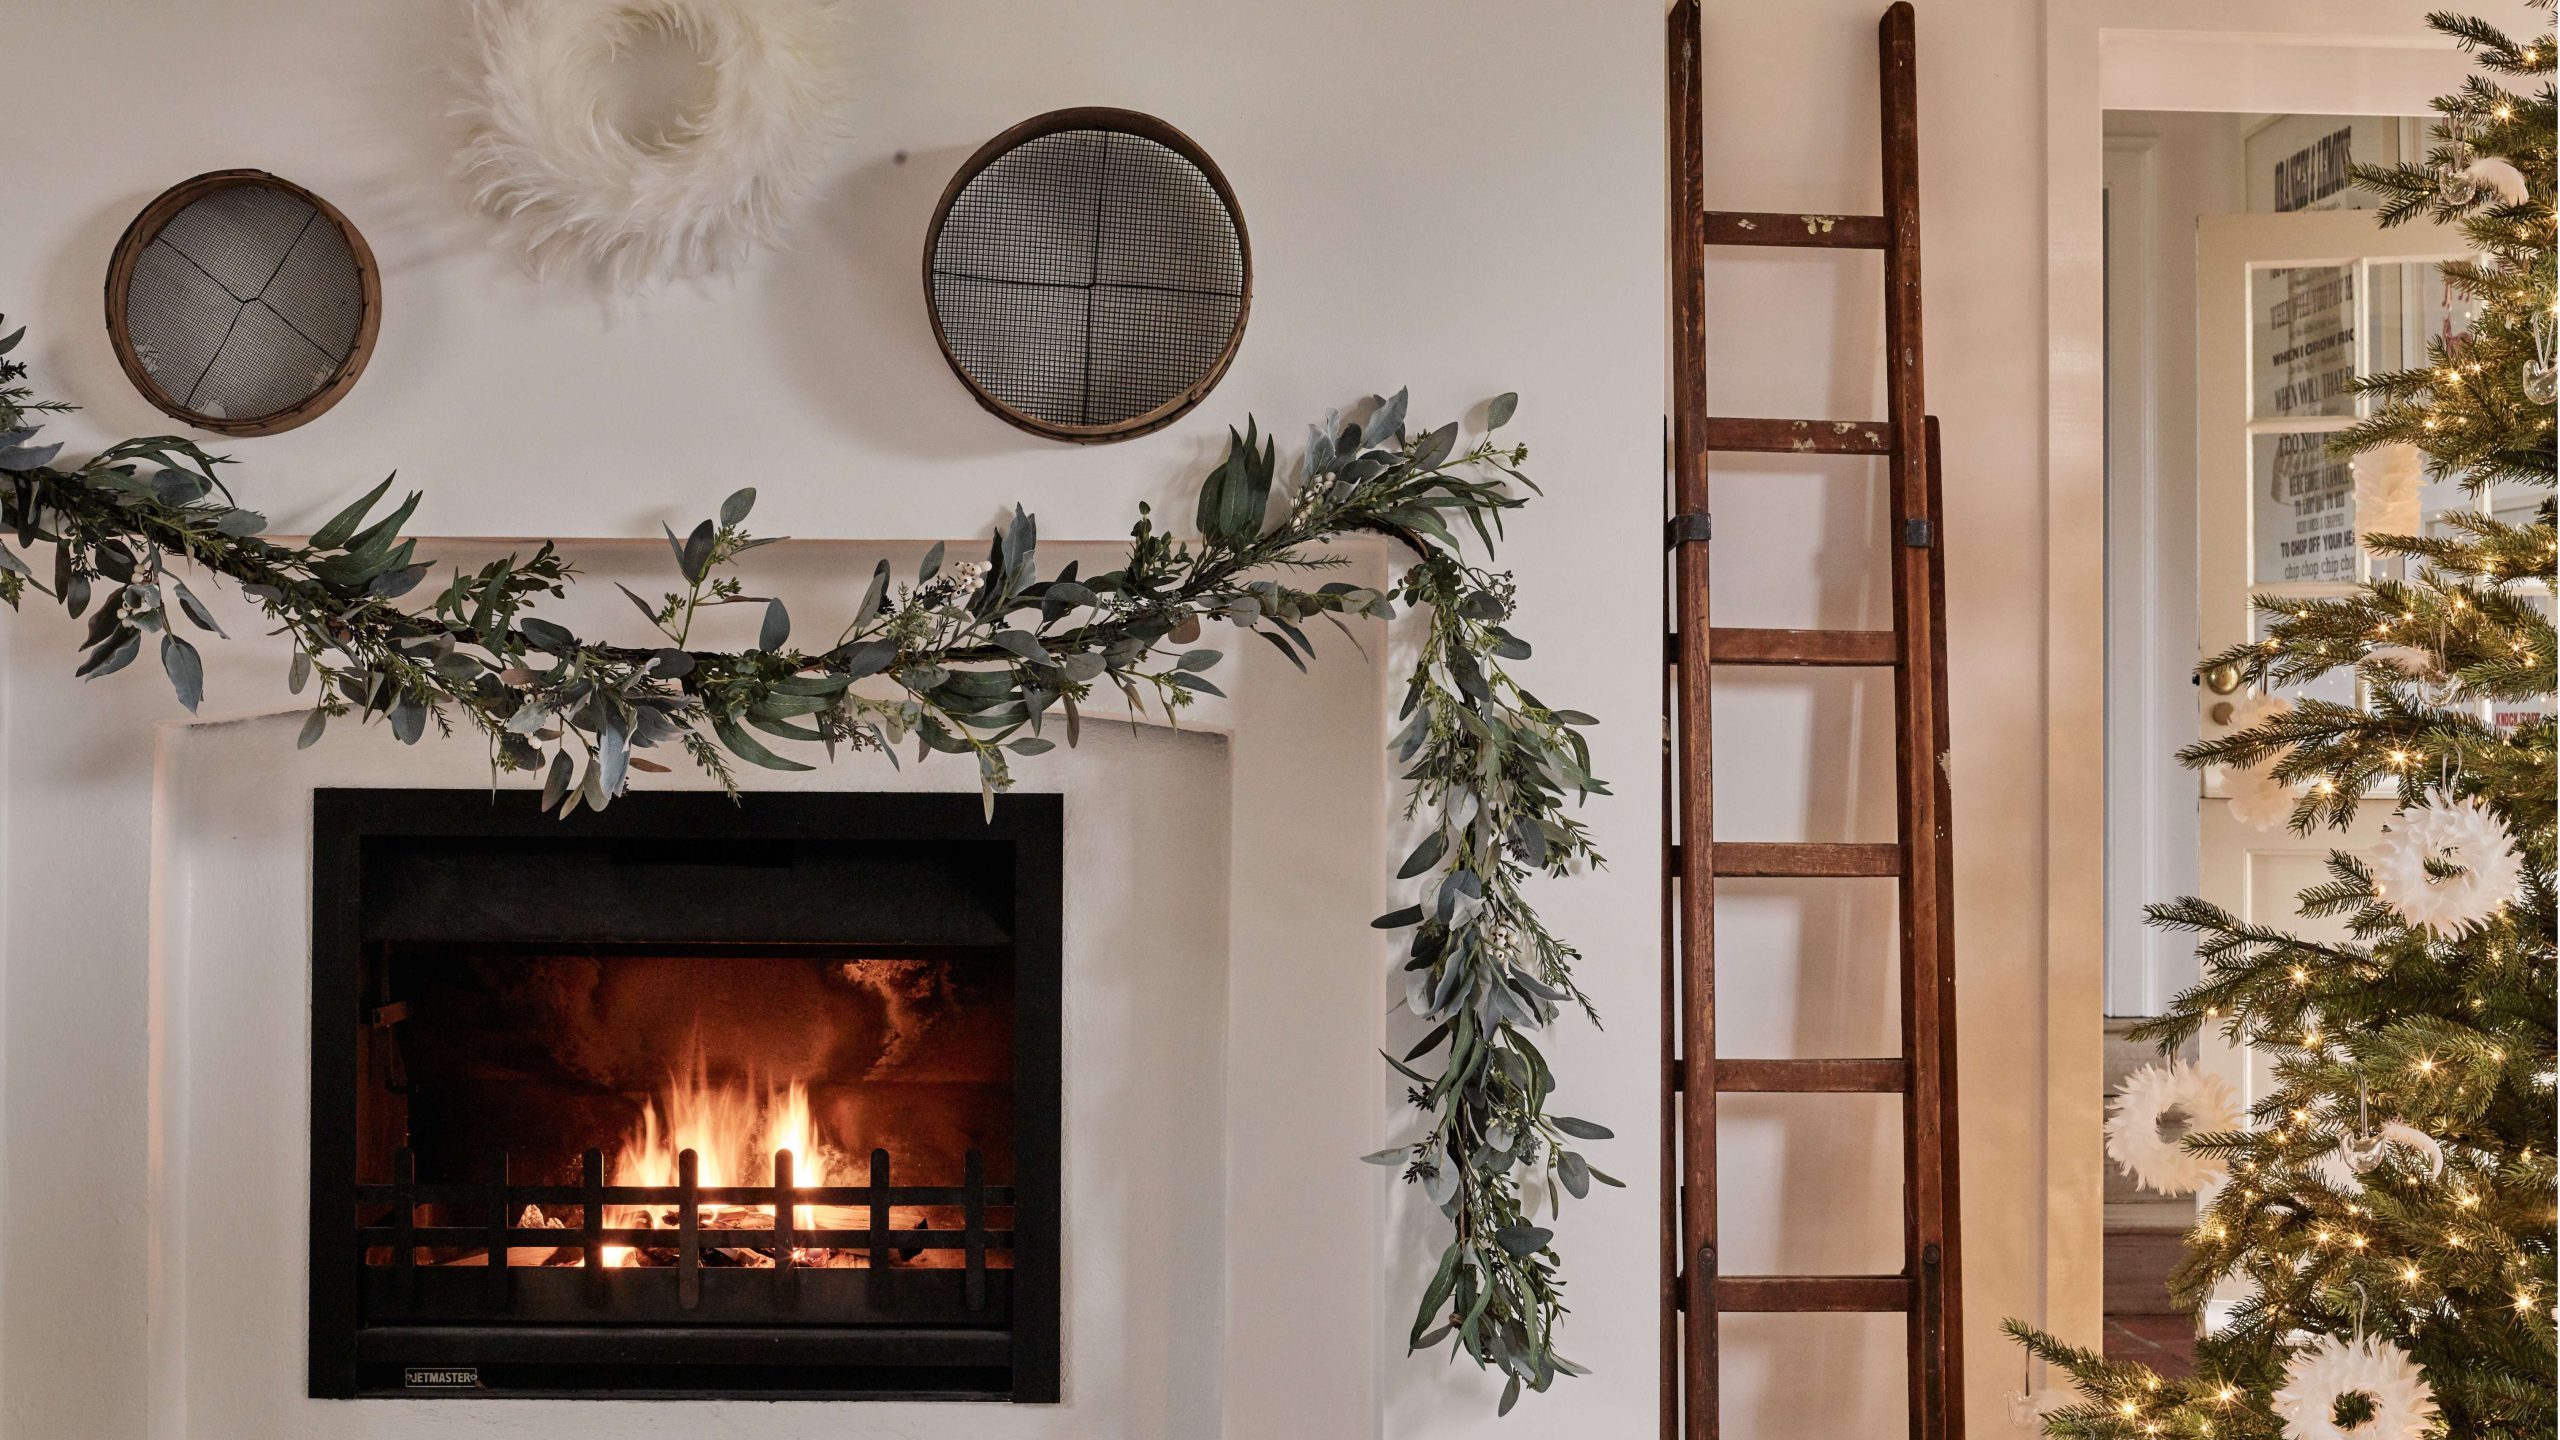 Christmas fireplace ideas – easy ways to add style to your mantel